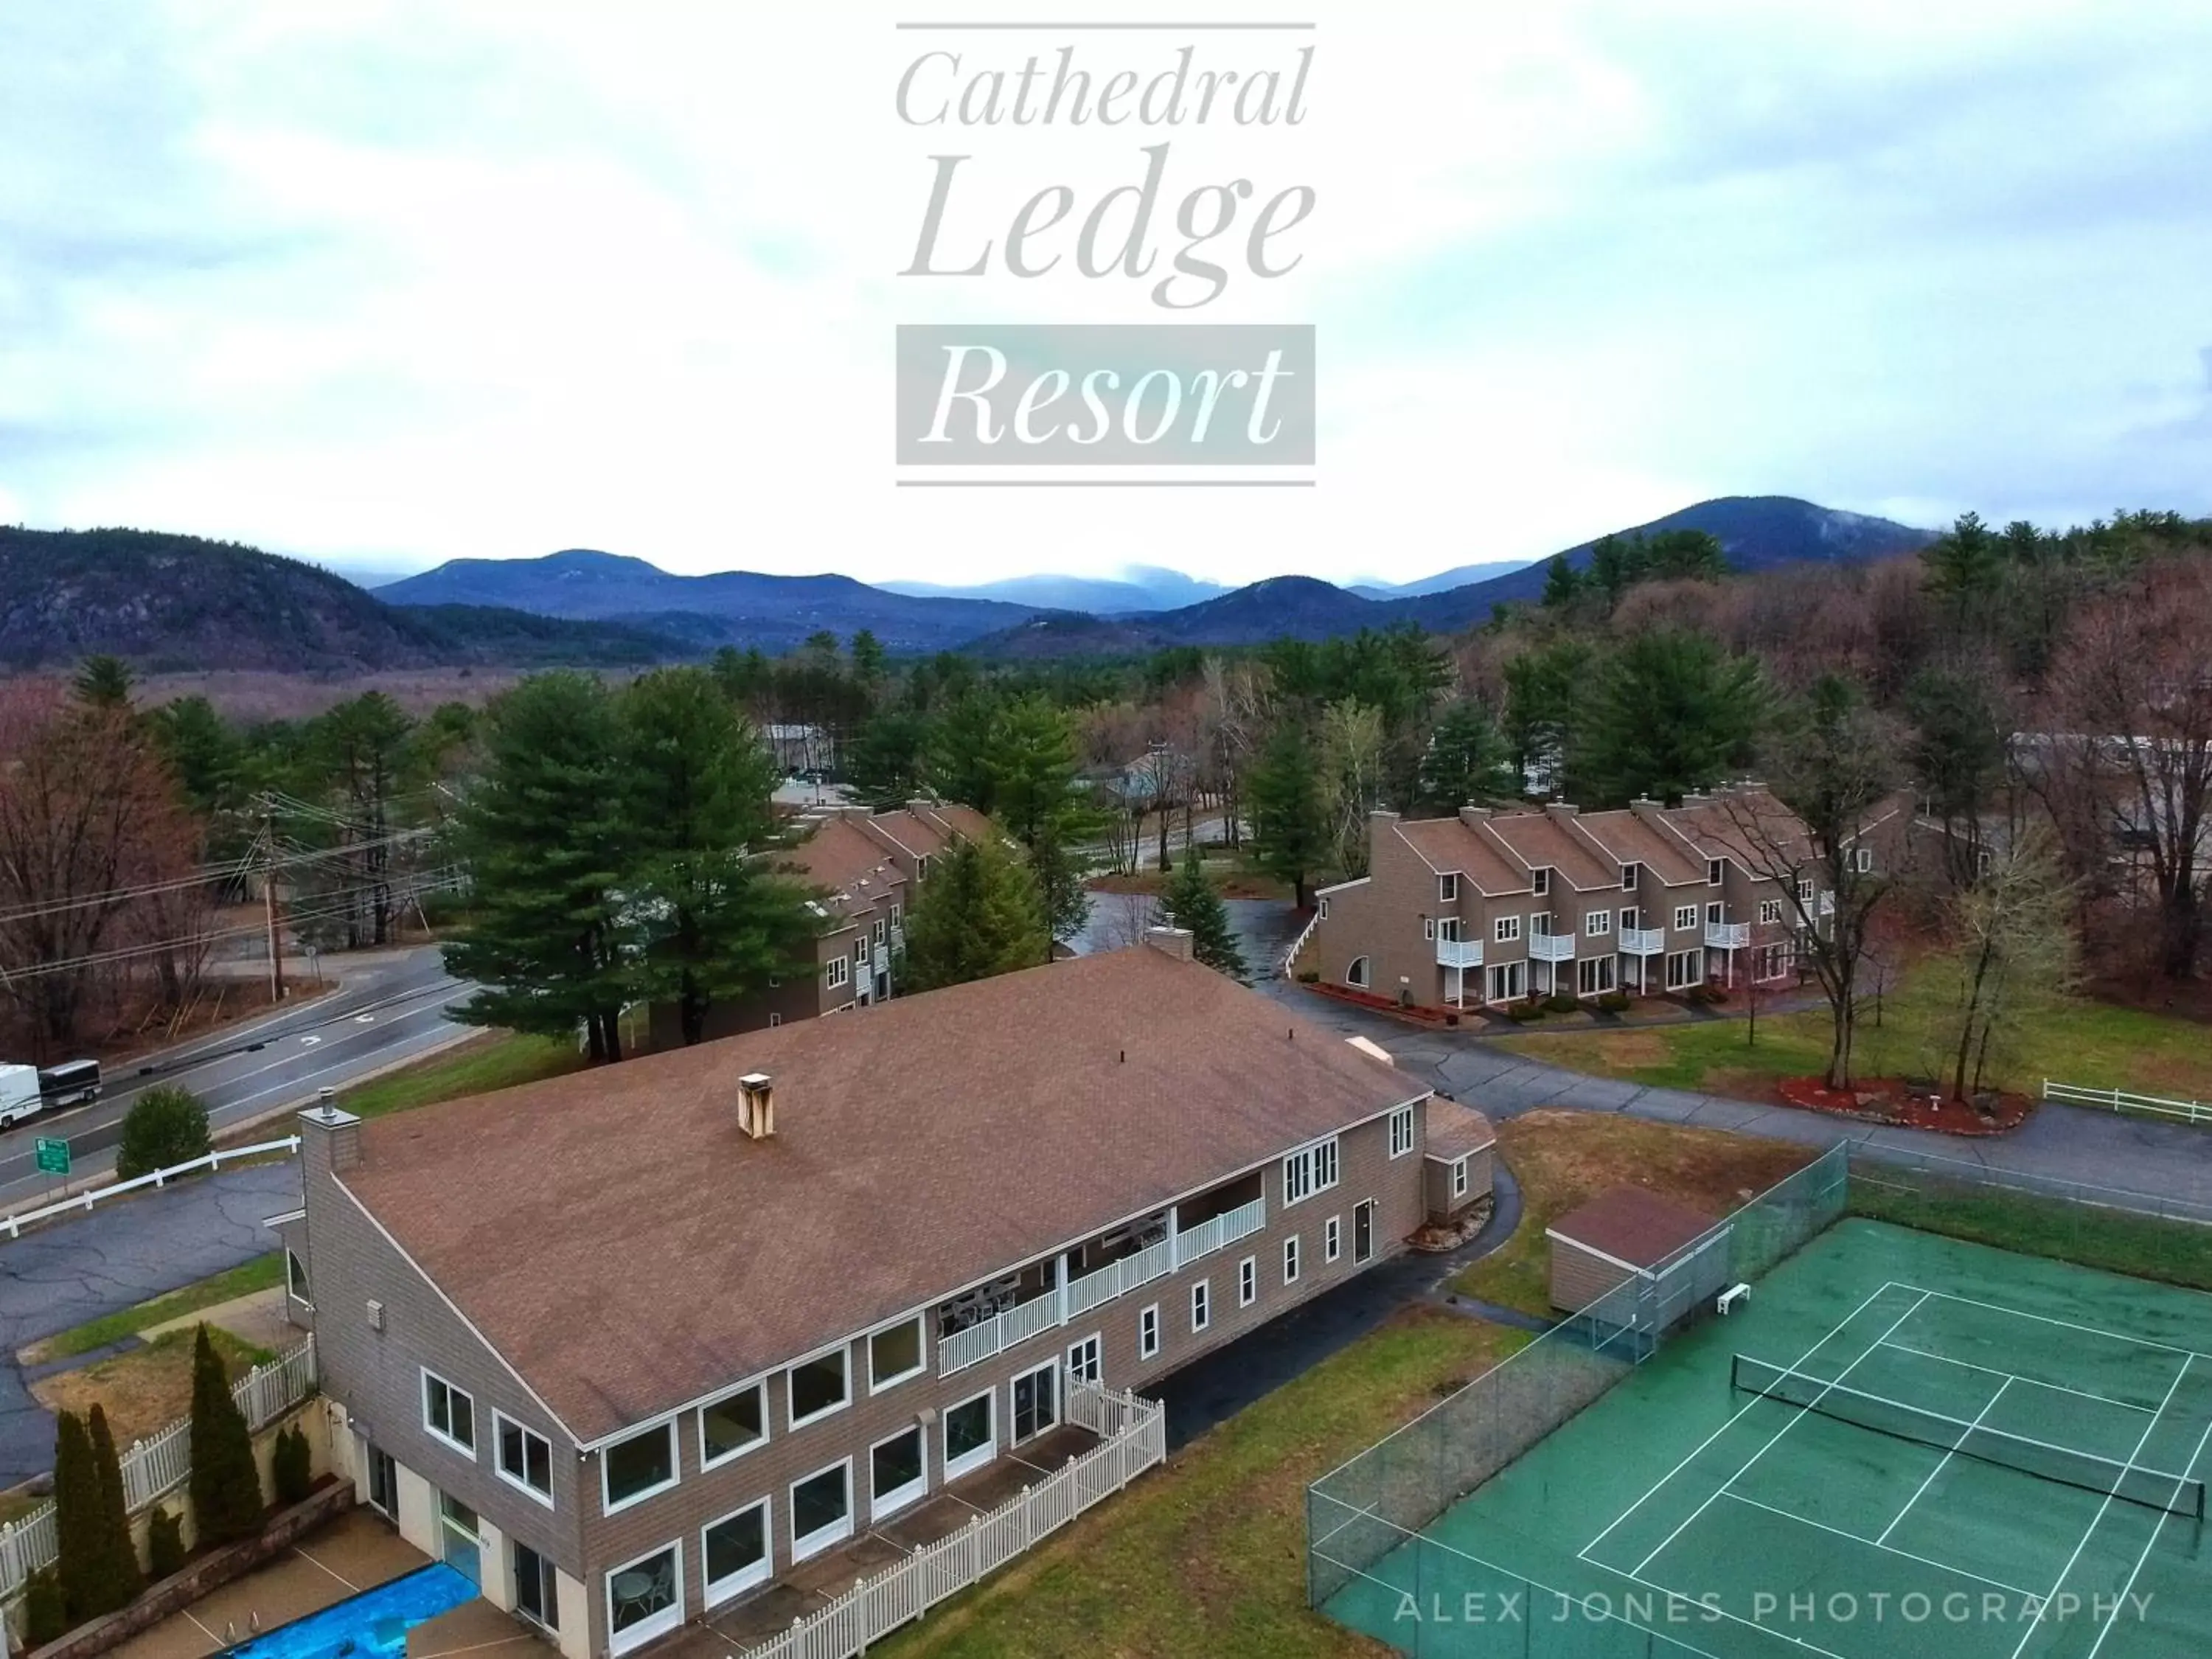 Bird's eye view in Cathedral Ledge Resort